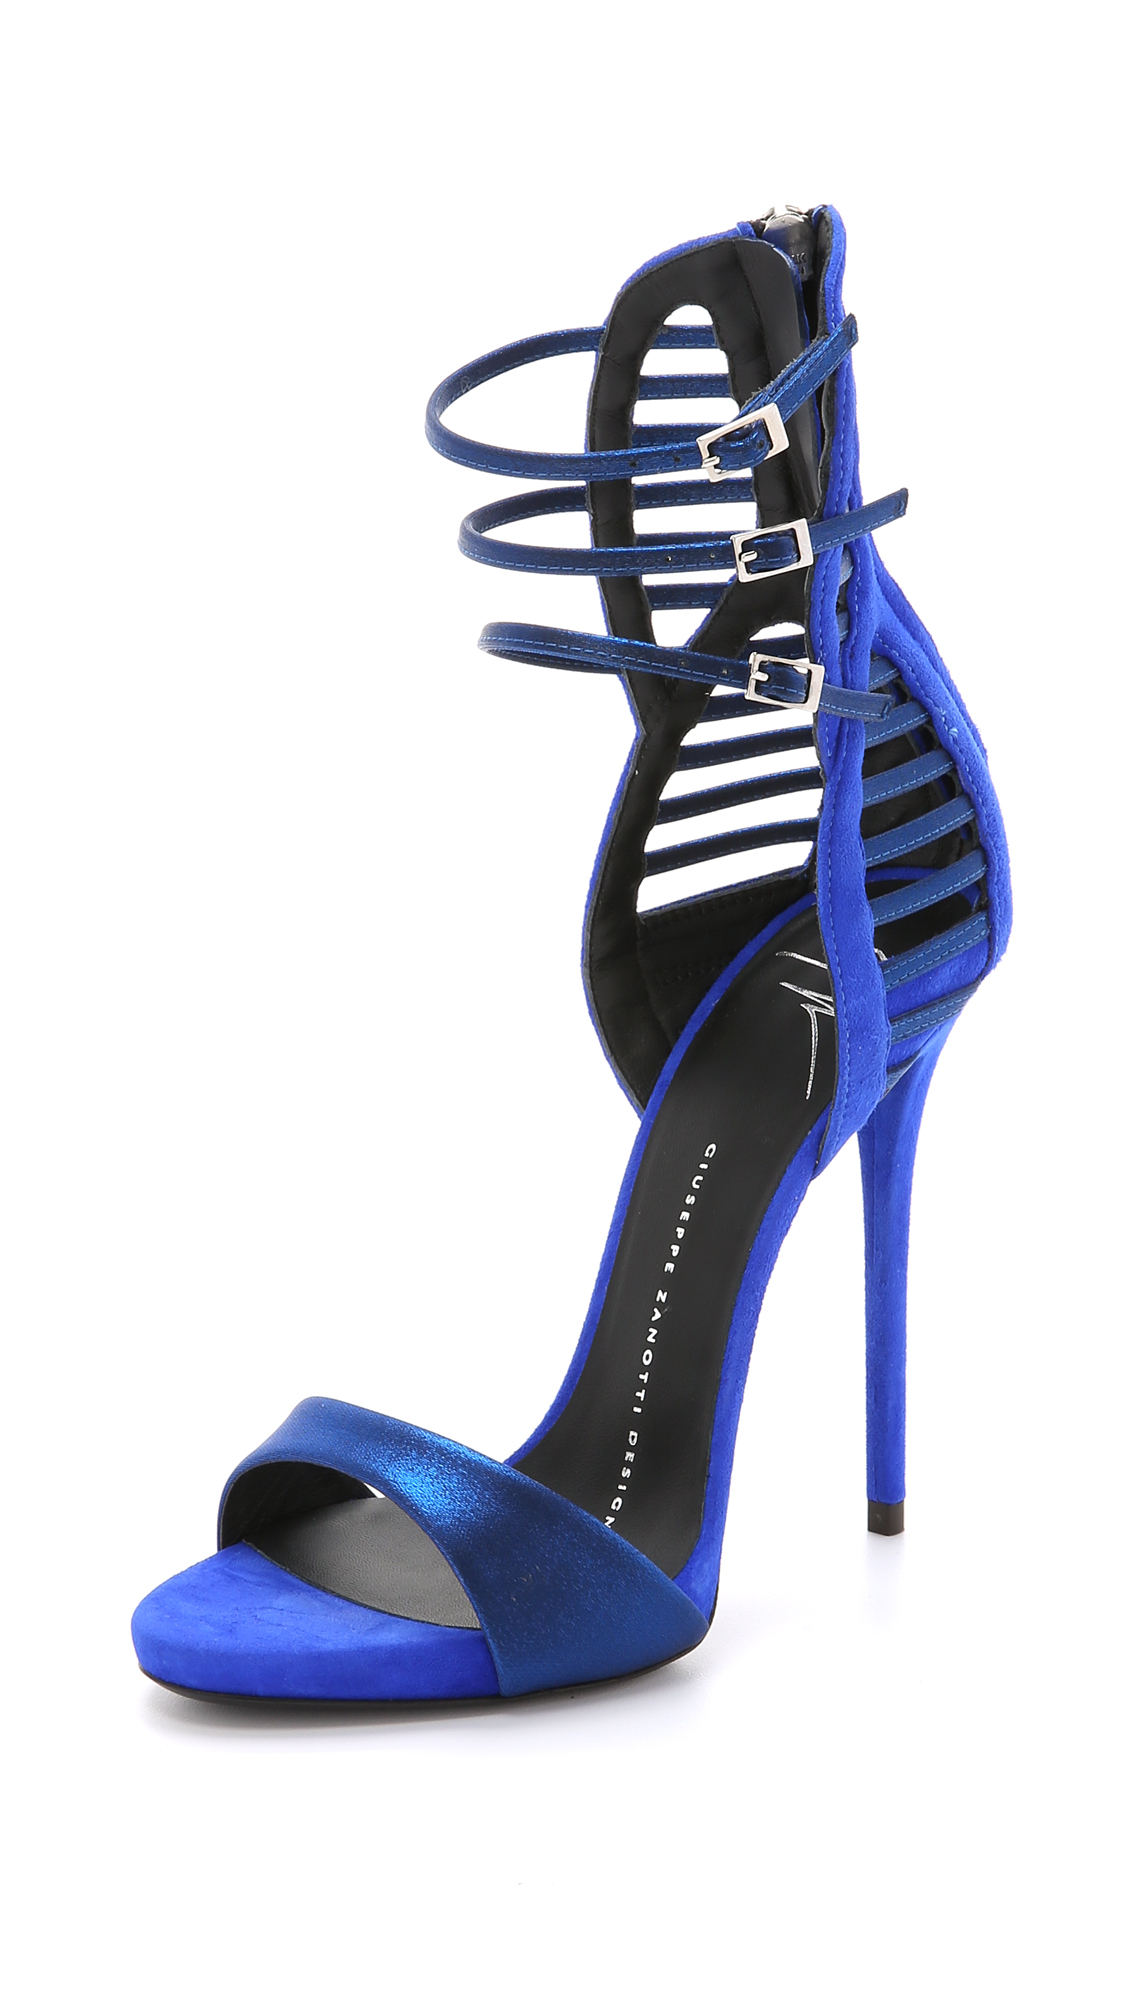 Lyst - Giuseppe Zanotti Suede Strappy Heeled Sandals - Electric Blue in ...